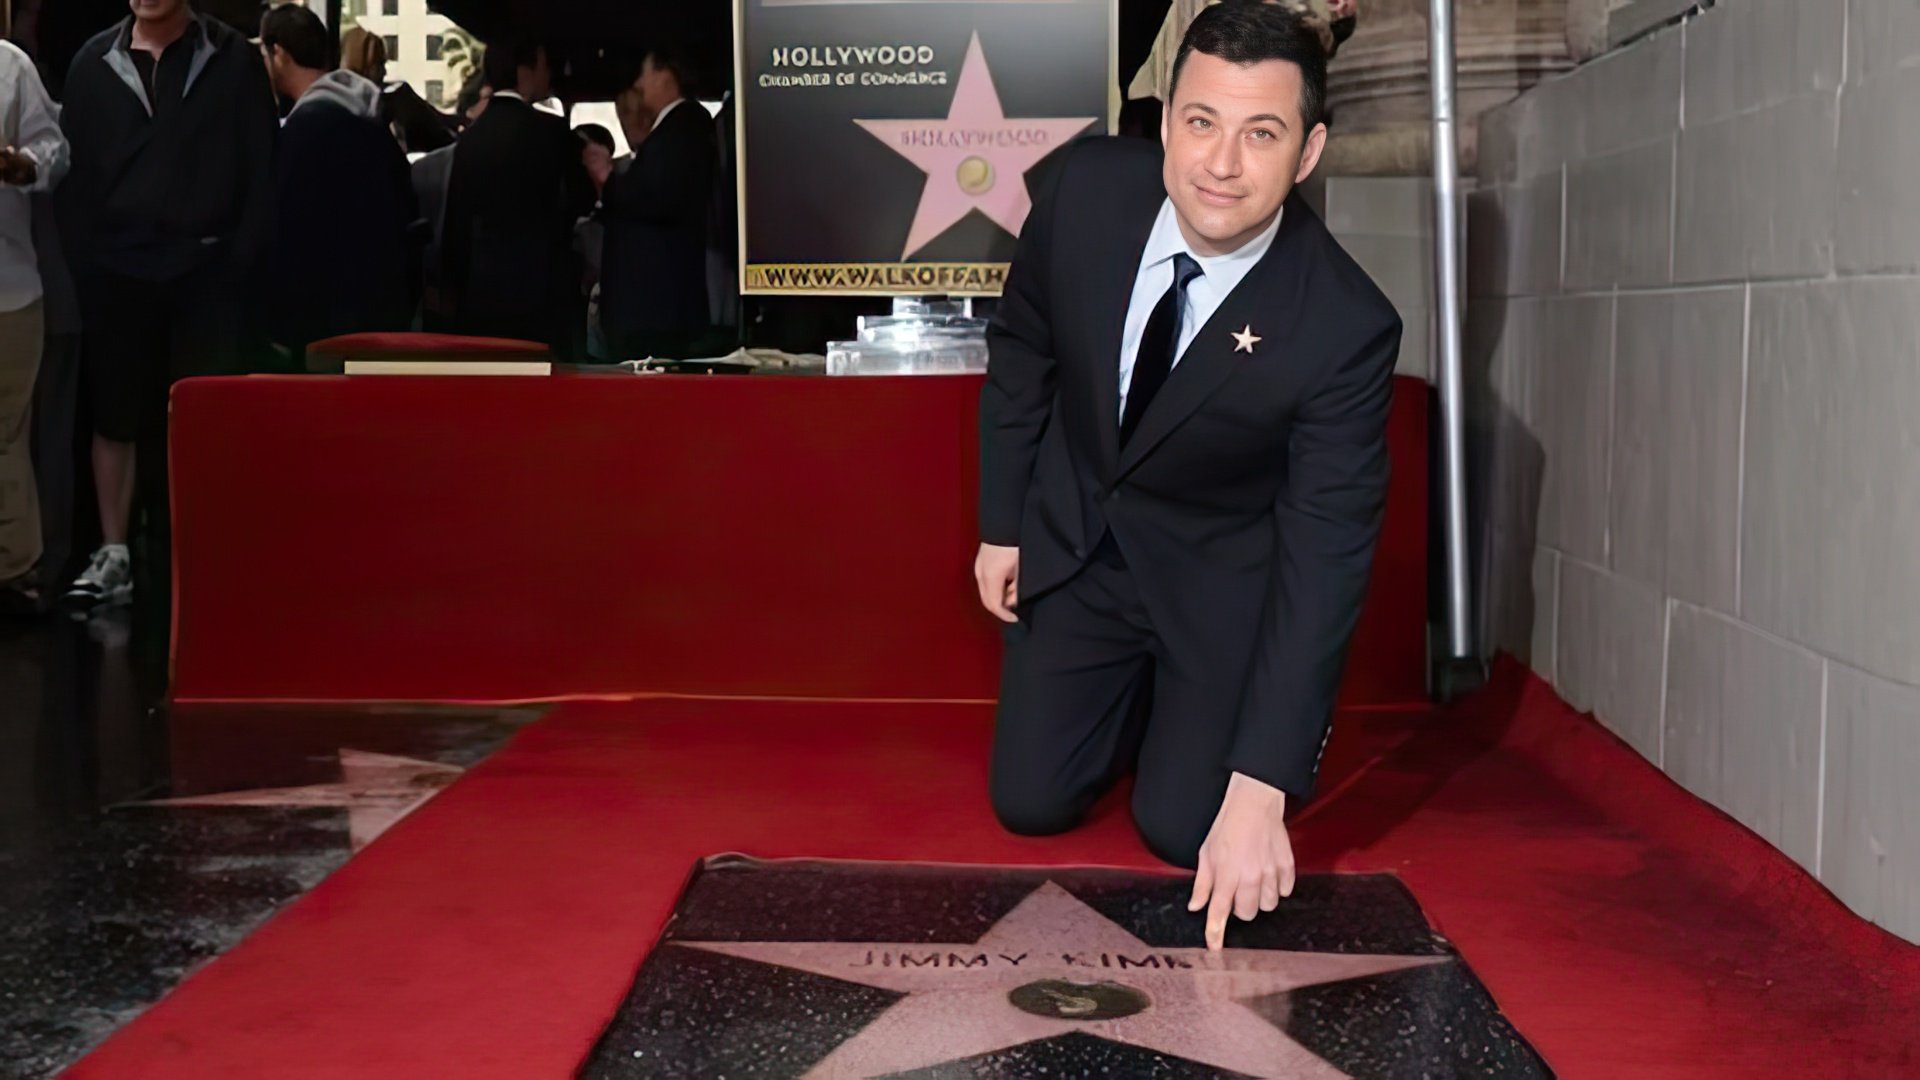 Jimmy Kimmel got his start at the Hollywood Walk of Fame